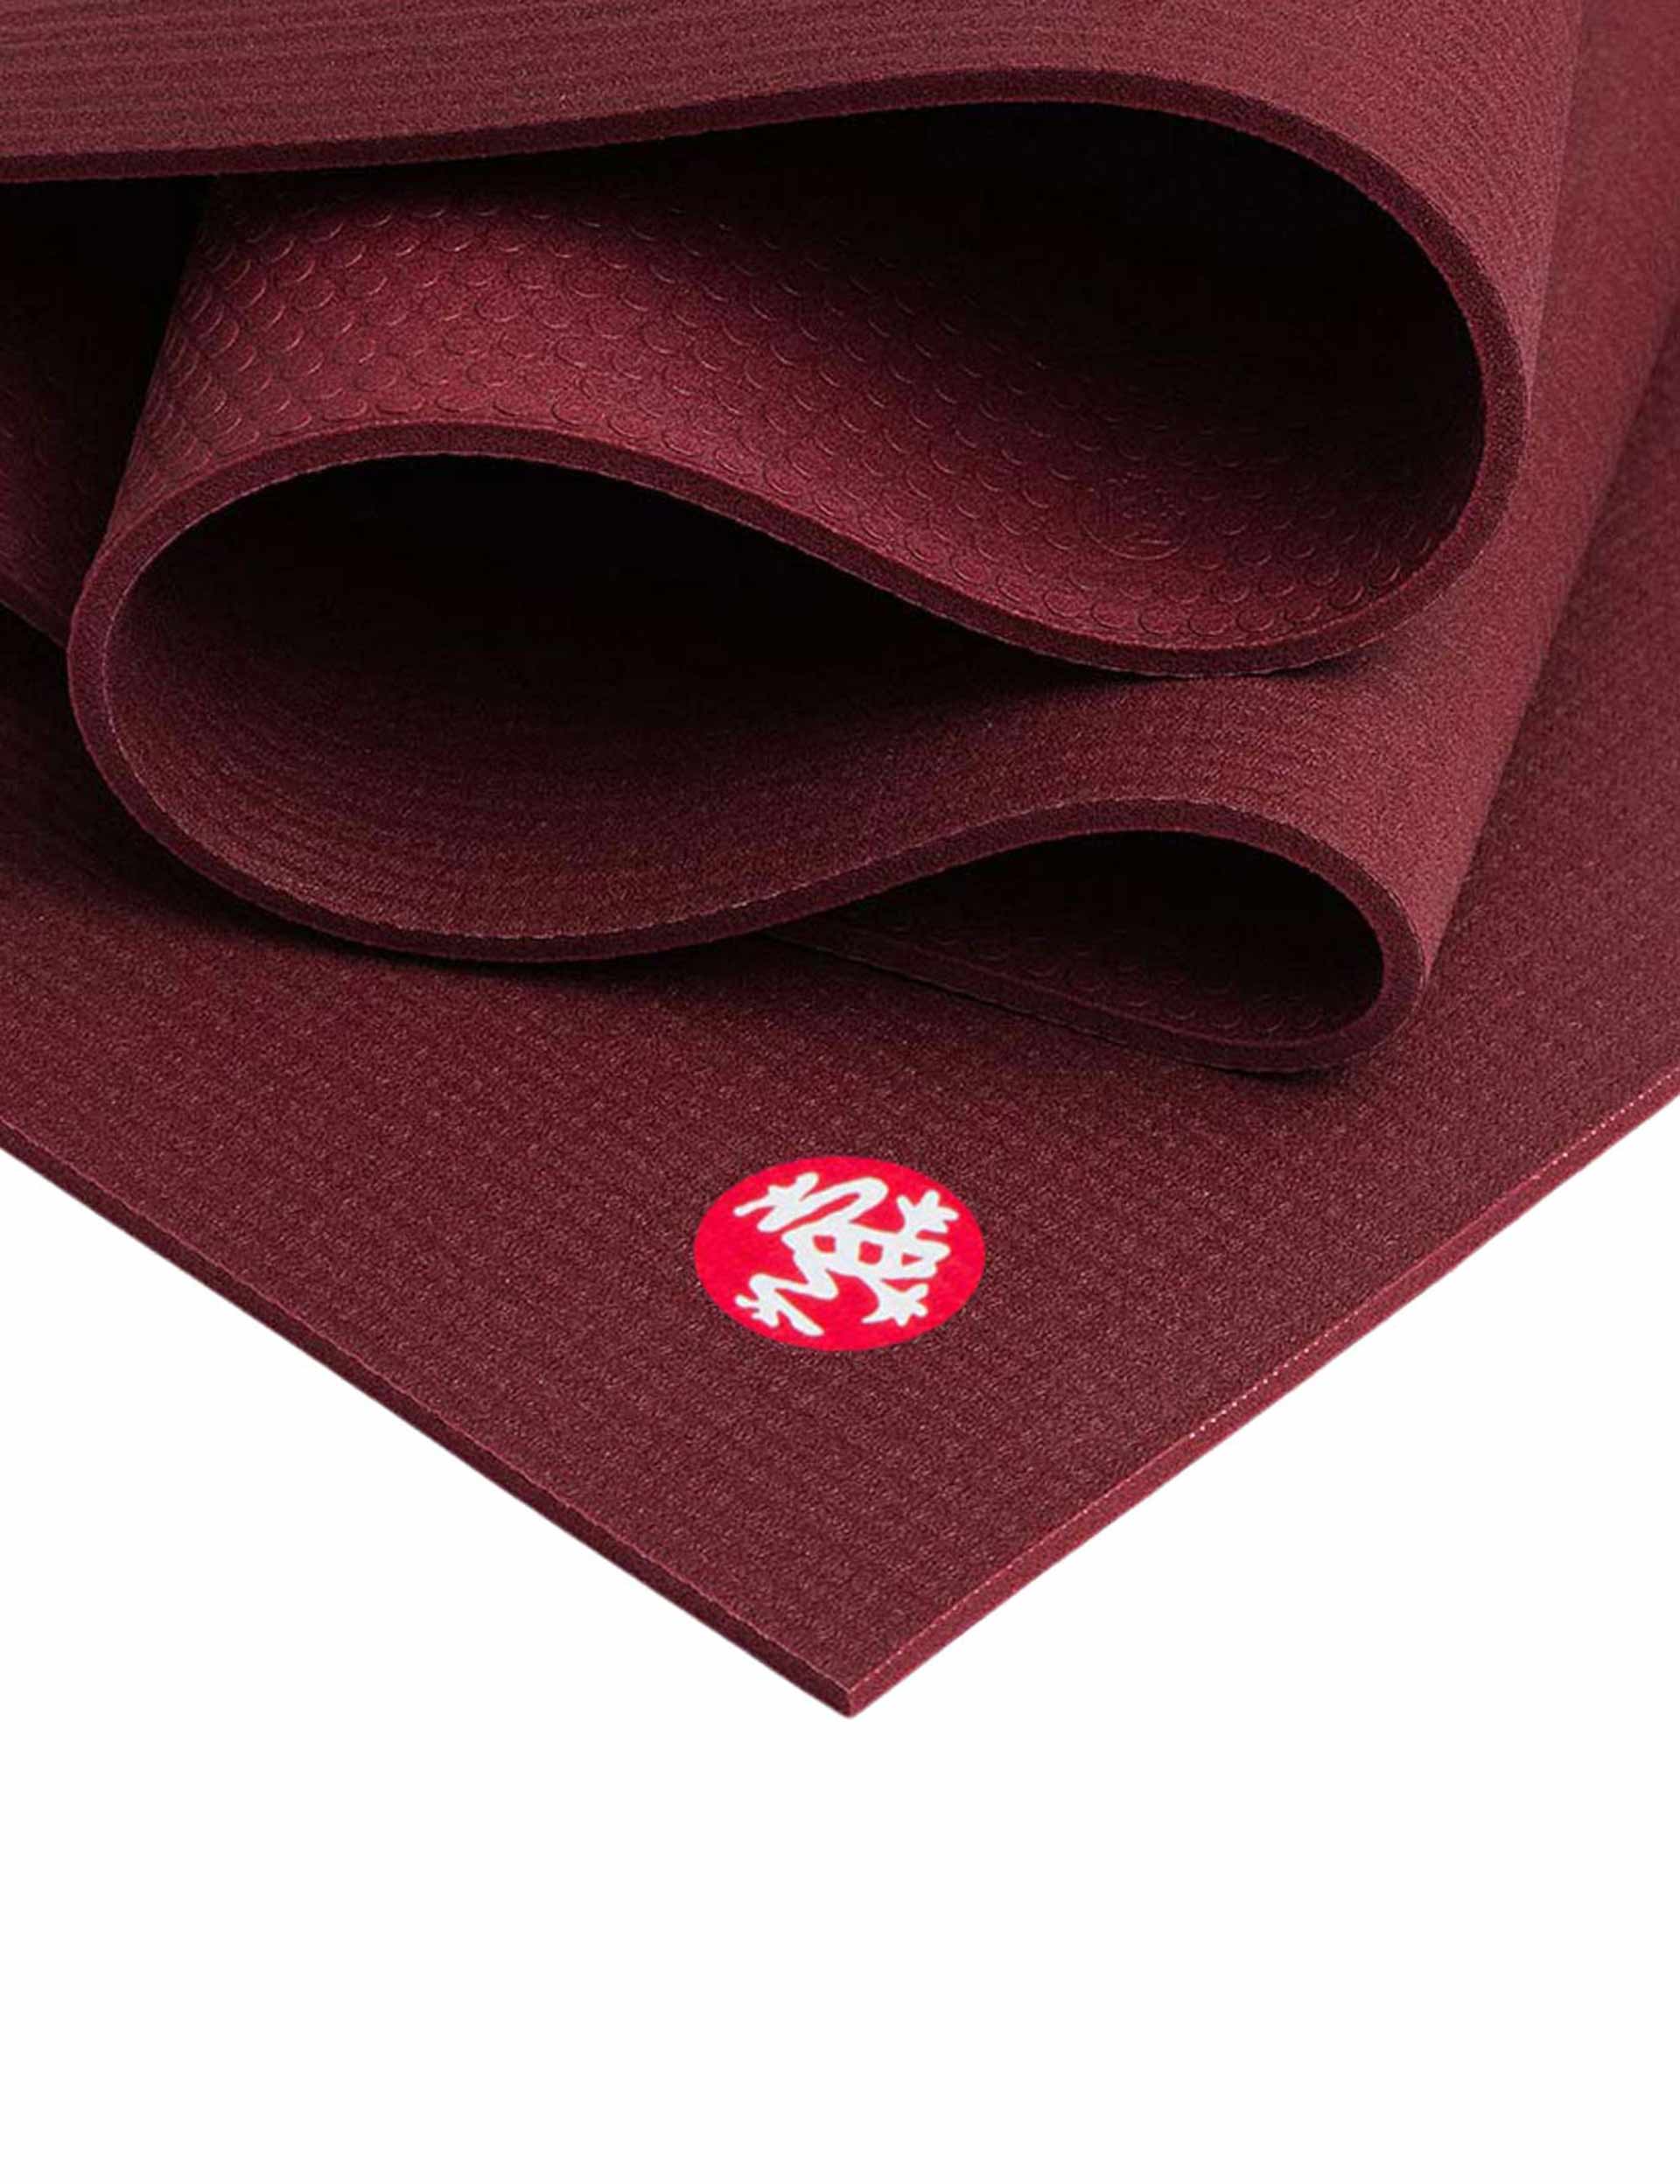 MANDUKA PRO YOGA MAT REVIEW - 6mm Thick - The Best And Most Durable Yoga Mat  - Closed Cell Yoga Mat 